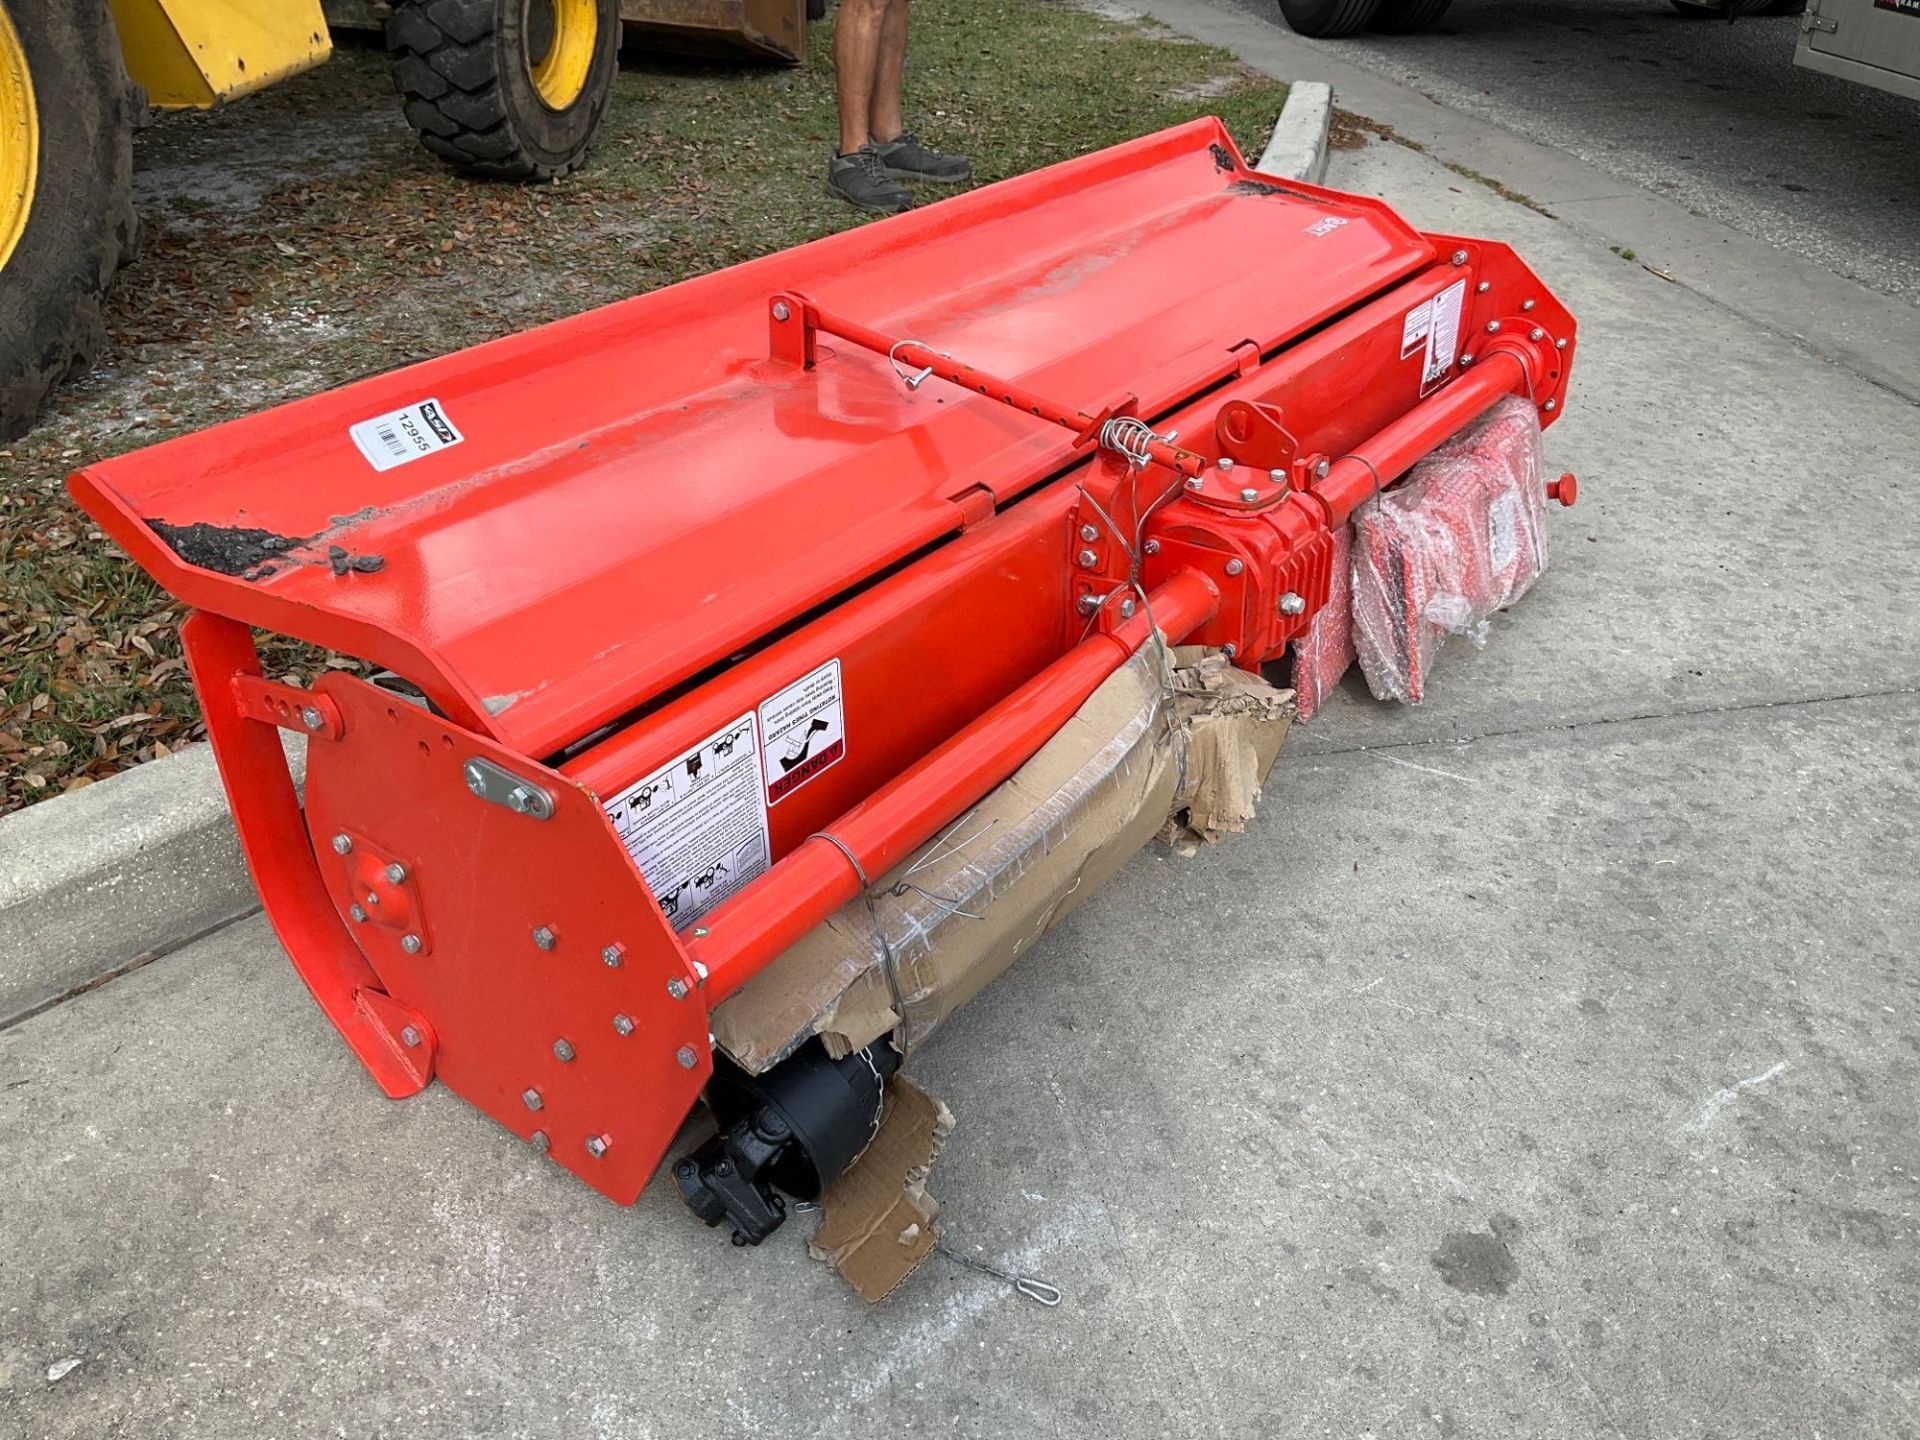 UNUSED 2022 MOWER KING HEAVY DUTY 3 POINT ROTARY TILLER ATTACHMENT MODEL TAS81 FOR UNIVERSAL SKID ST - Image 4 of 6